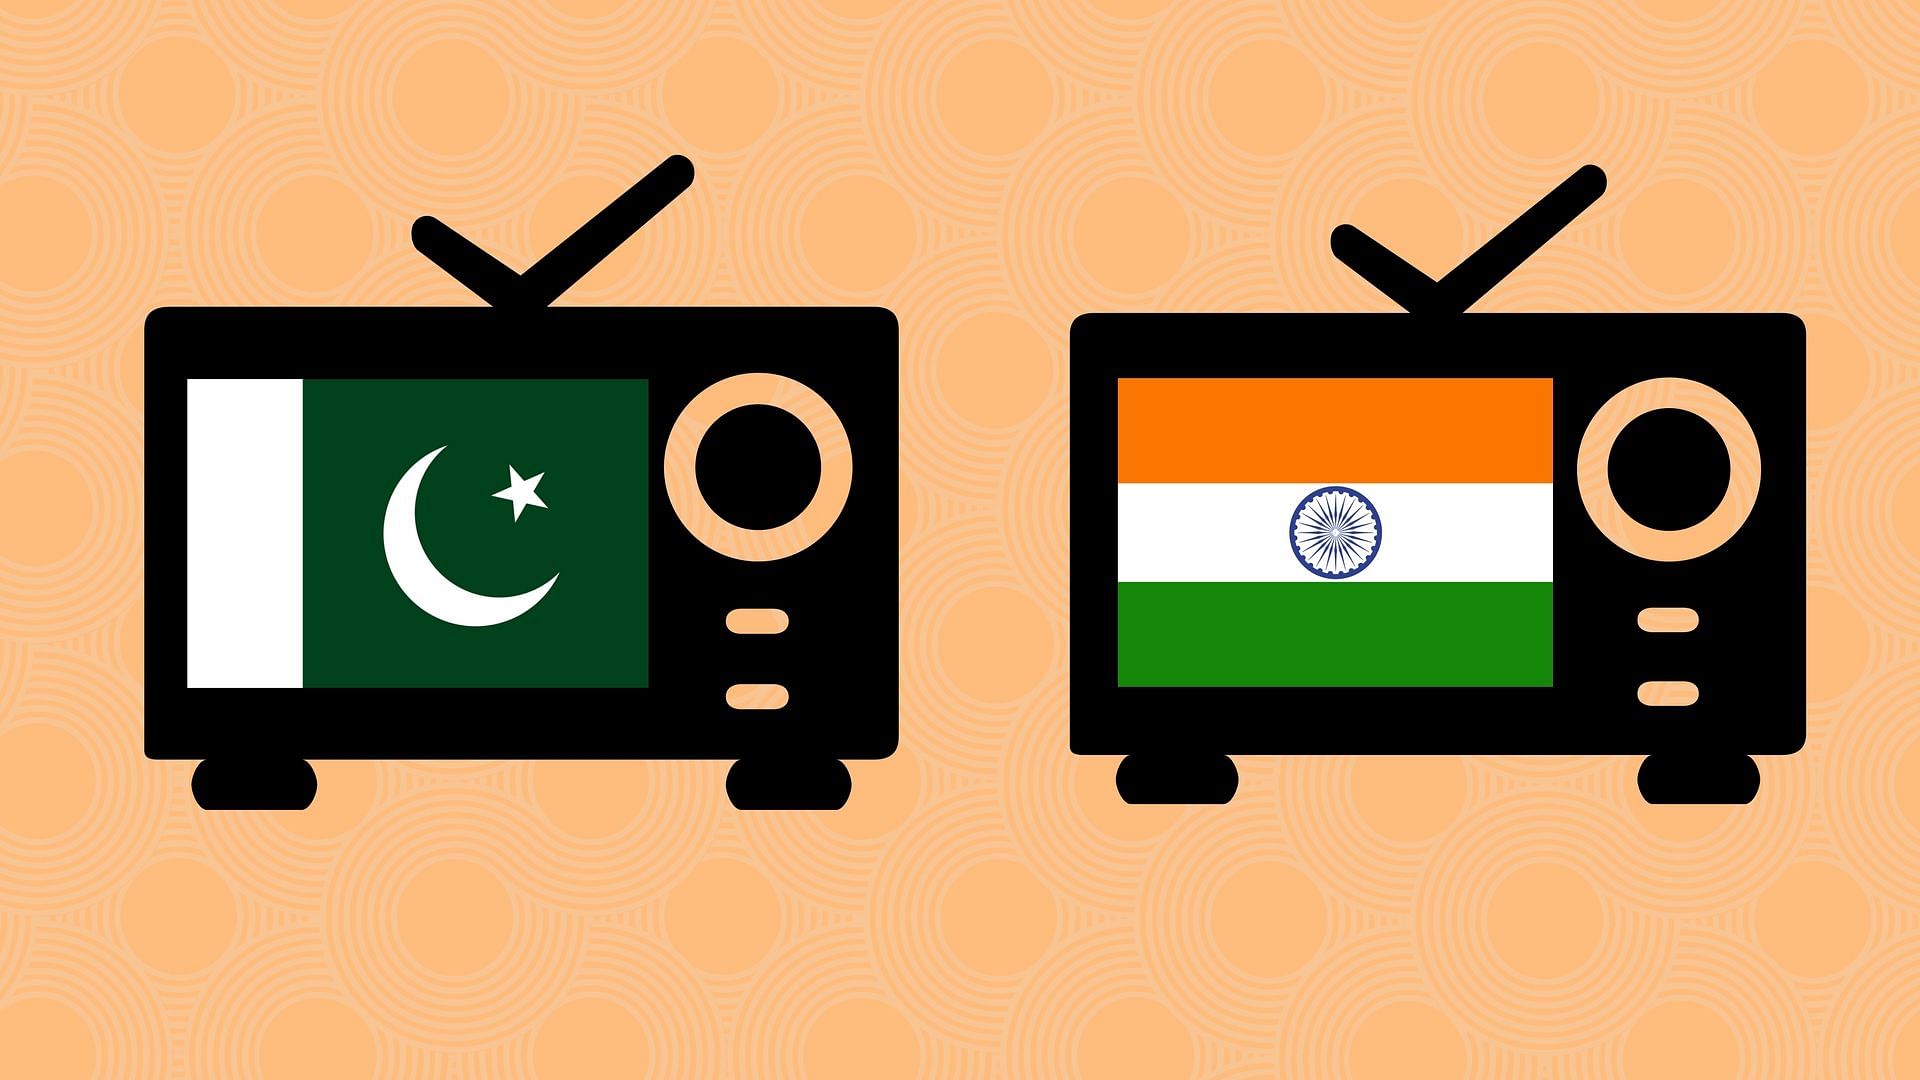 Pakistan will only air Indian content if India obliges too.&nbsp;